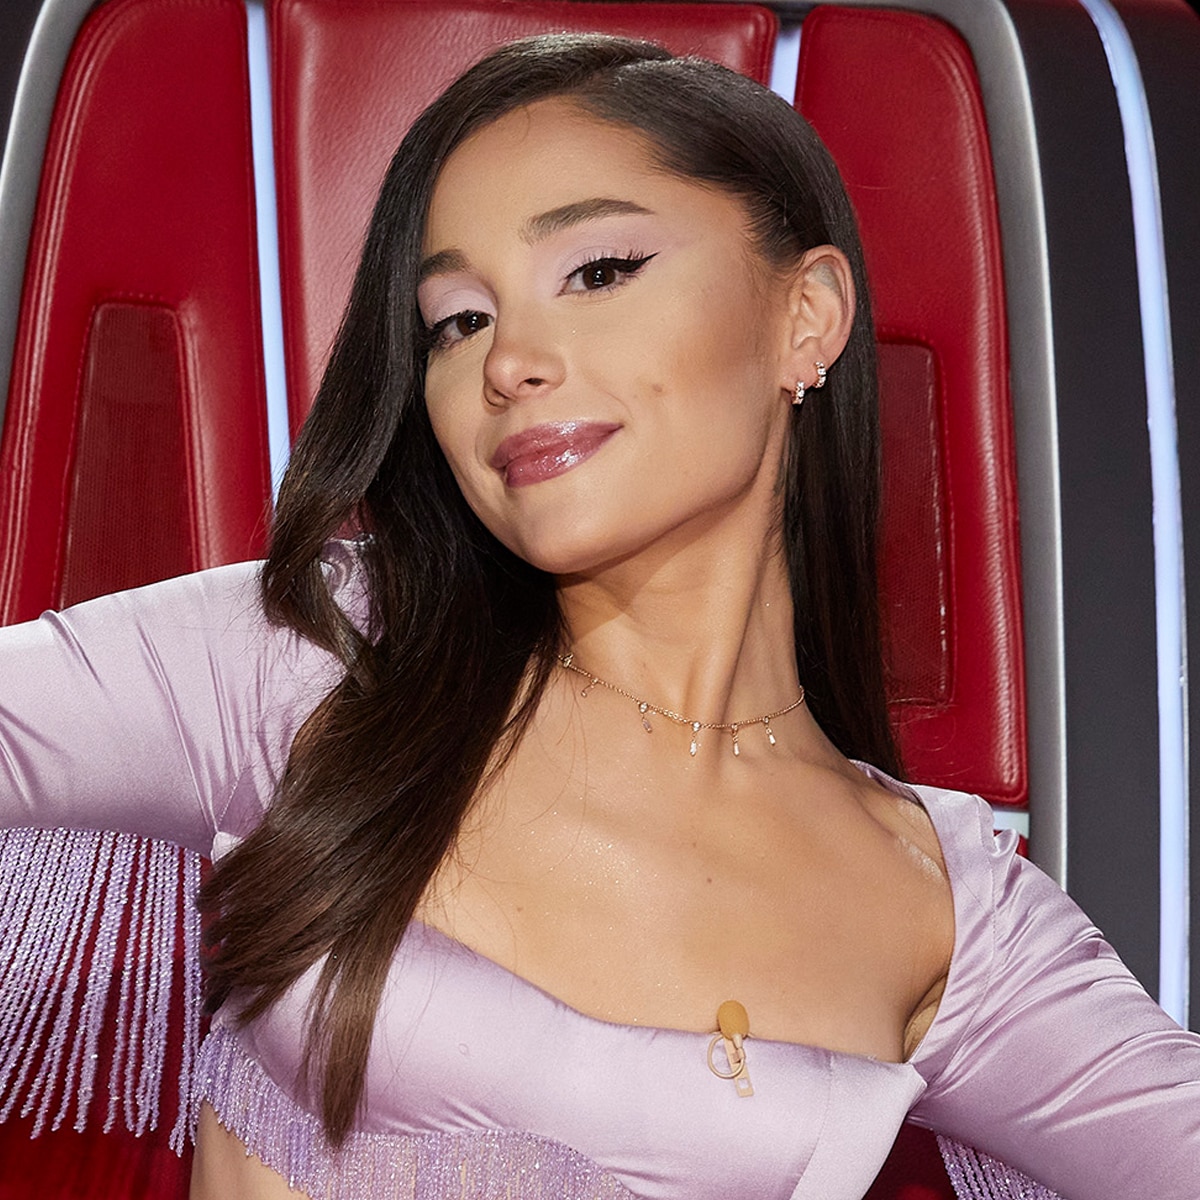 VMAs 2020 Ariana Grande Ditched Iconic Ponytail for Ombré Pigtails